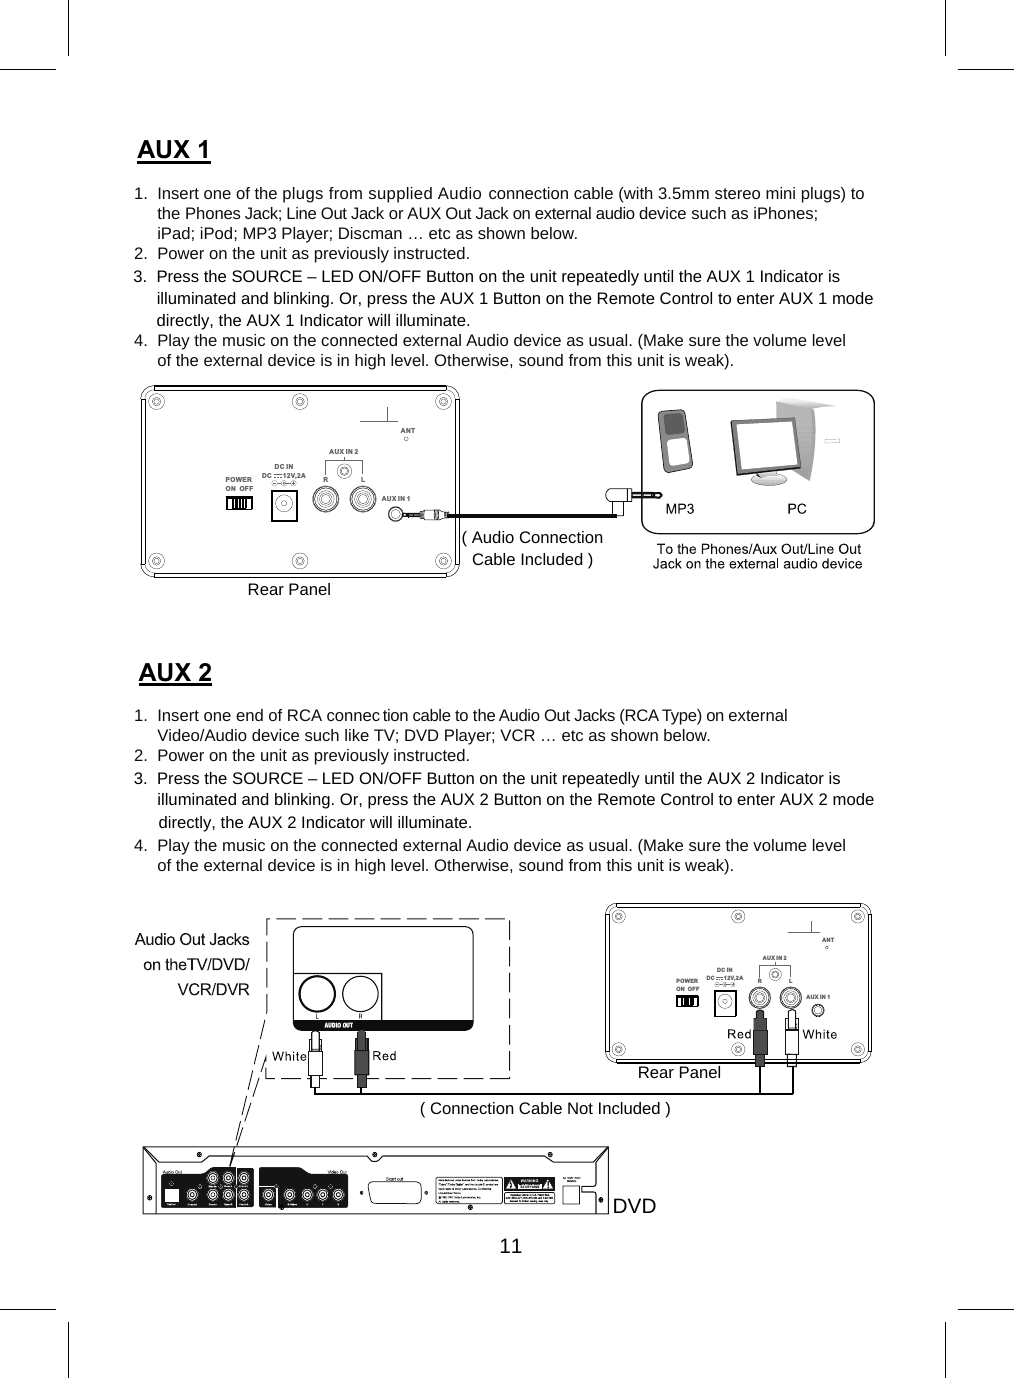  1. Insert one of the plugs from supplied Audio connection cable (with 3.5mm stereo mini plugs) tothe Phones Jack; Line Out Jack or AUX Out Jack on external audio device such as iPhones;iPad; iPod; MP3 Player; Discman … etc as shown below.2. Power on the unit as previously instructed.4. Play the music on the connected external Audio device as usual. (Make sure the volume levelof the external device is in high level. Otherwise, sound from this unit is weak).1. Insert one end of RCA connection cable to the Audio Out Jacks (RCA Type) on externalVideo/Audio device such like TV; DVD Player; VCR … etc as shown below.2. Power on the unit as previously instructed.4. Play the music on the connected external Audio device as usual. (Make sure the volume levelof the external device is in high level. Otherwise, sound from this unit is weak).POWERON  OFFAU X IN 1AU X IN 2RLDC I N DC      12V,2 AANTRear Panel POWERON  OFFAUX IN 1AUX IN 2RLDC I N DC      12V,2AANT( Connection Cable Not Included )Rear Panel DVD( Audio Connection Cable Included )11$8; $8; 3. Press the SOURCE – LED ON/OFF Button on the unit repeatedly until the AUX 1 Indicator isilluminated and blinking. Or, press the AUX 1 Button on the Remote Control to enter AUX 1 modedirectly, the AUX 1 Indicator will illuminate.3. Press the SOURCE – LED ON/OFF Button on the unit repeatedly until the AUX 2 Indicator isilluminated and blinking. Or, press the AUX 2 Button on the Remote Control to enter AUX 2 modedirectly, the AUX 2 Indicator will illuminate.